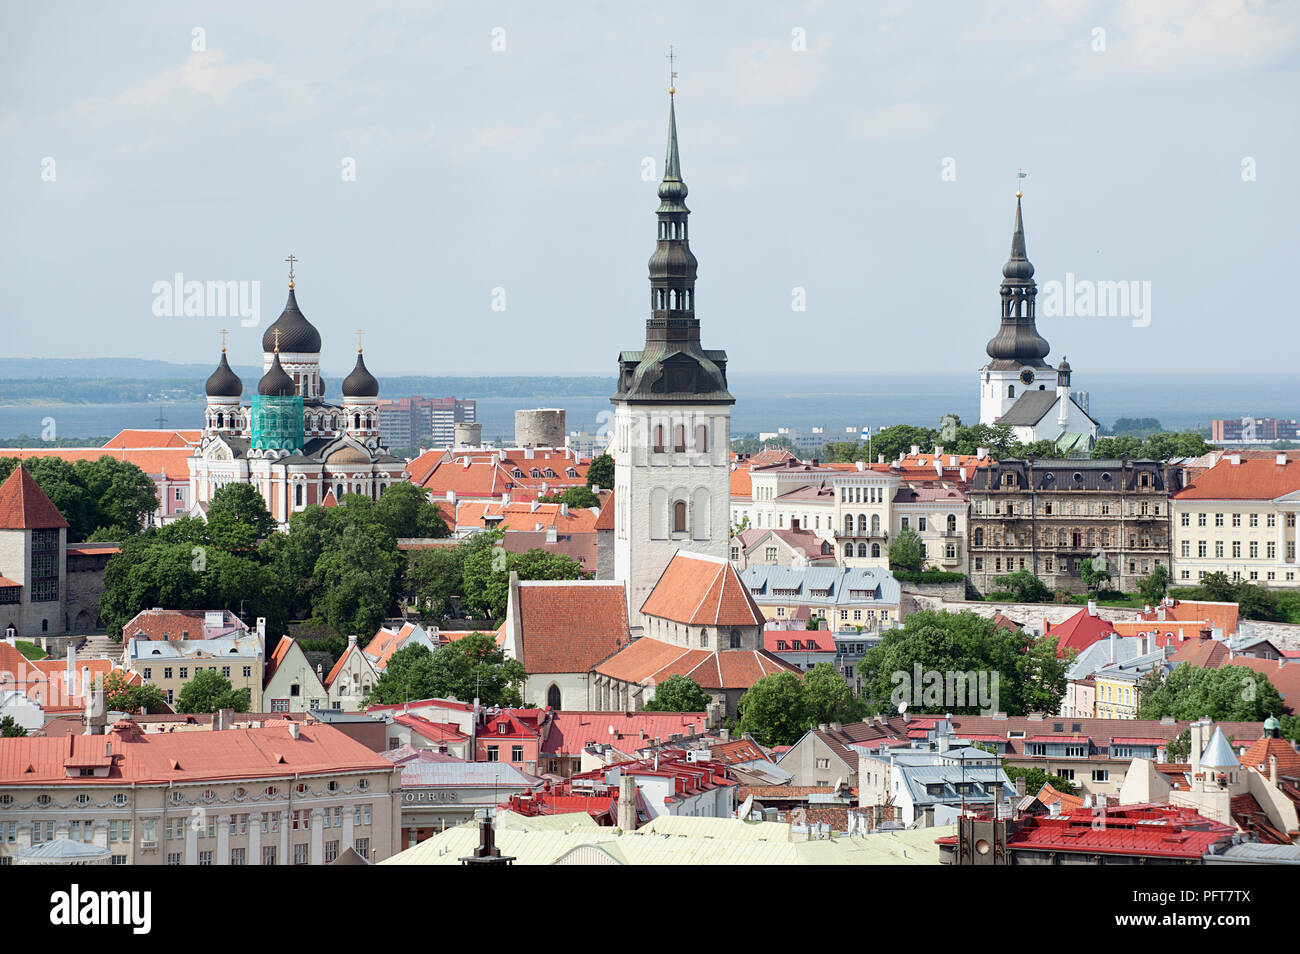 Estonia, Tallinn, view over rooftops including Dome Church, Niguliste Church and the Orthodox Cathedral of Alexander Nevsky Stock Photo